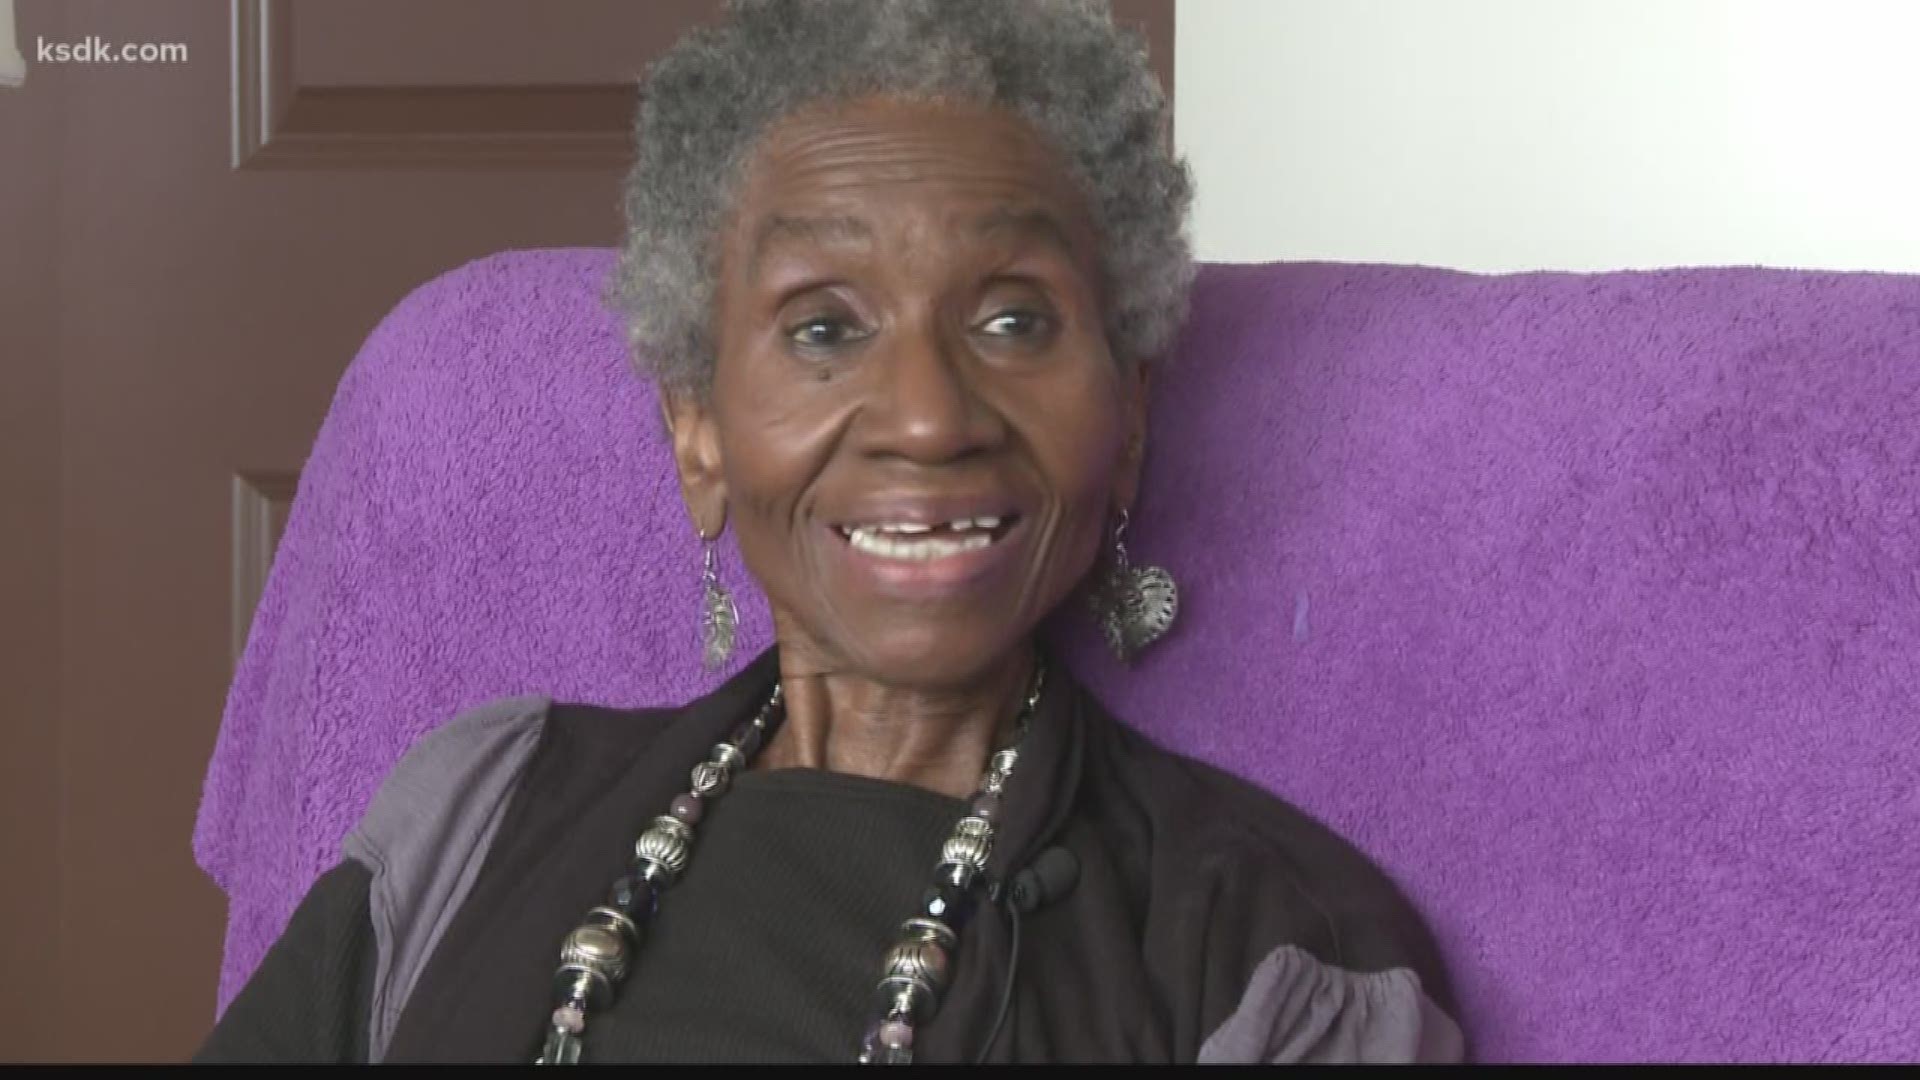 The 86-year-old great-grandmother is shocked that her story has taken off.